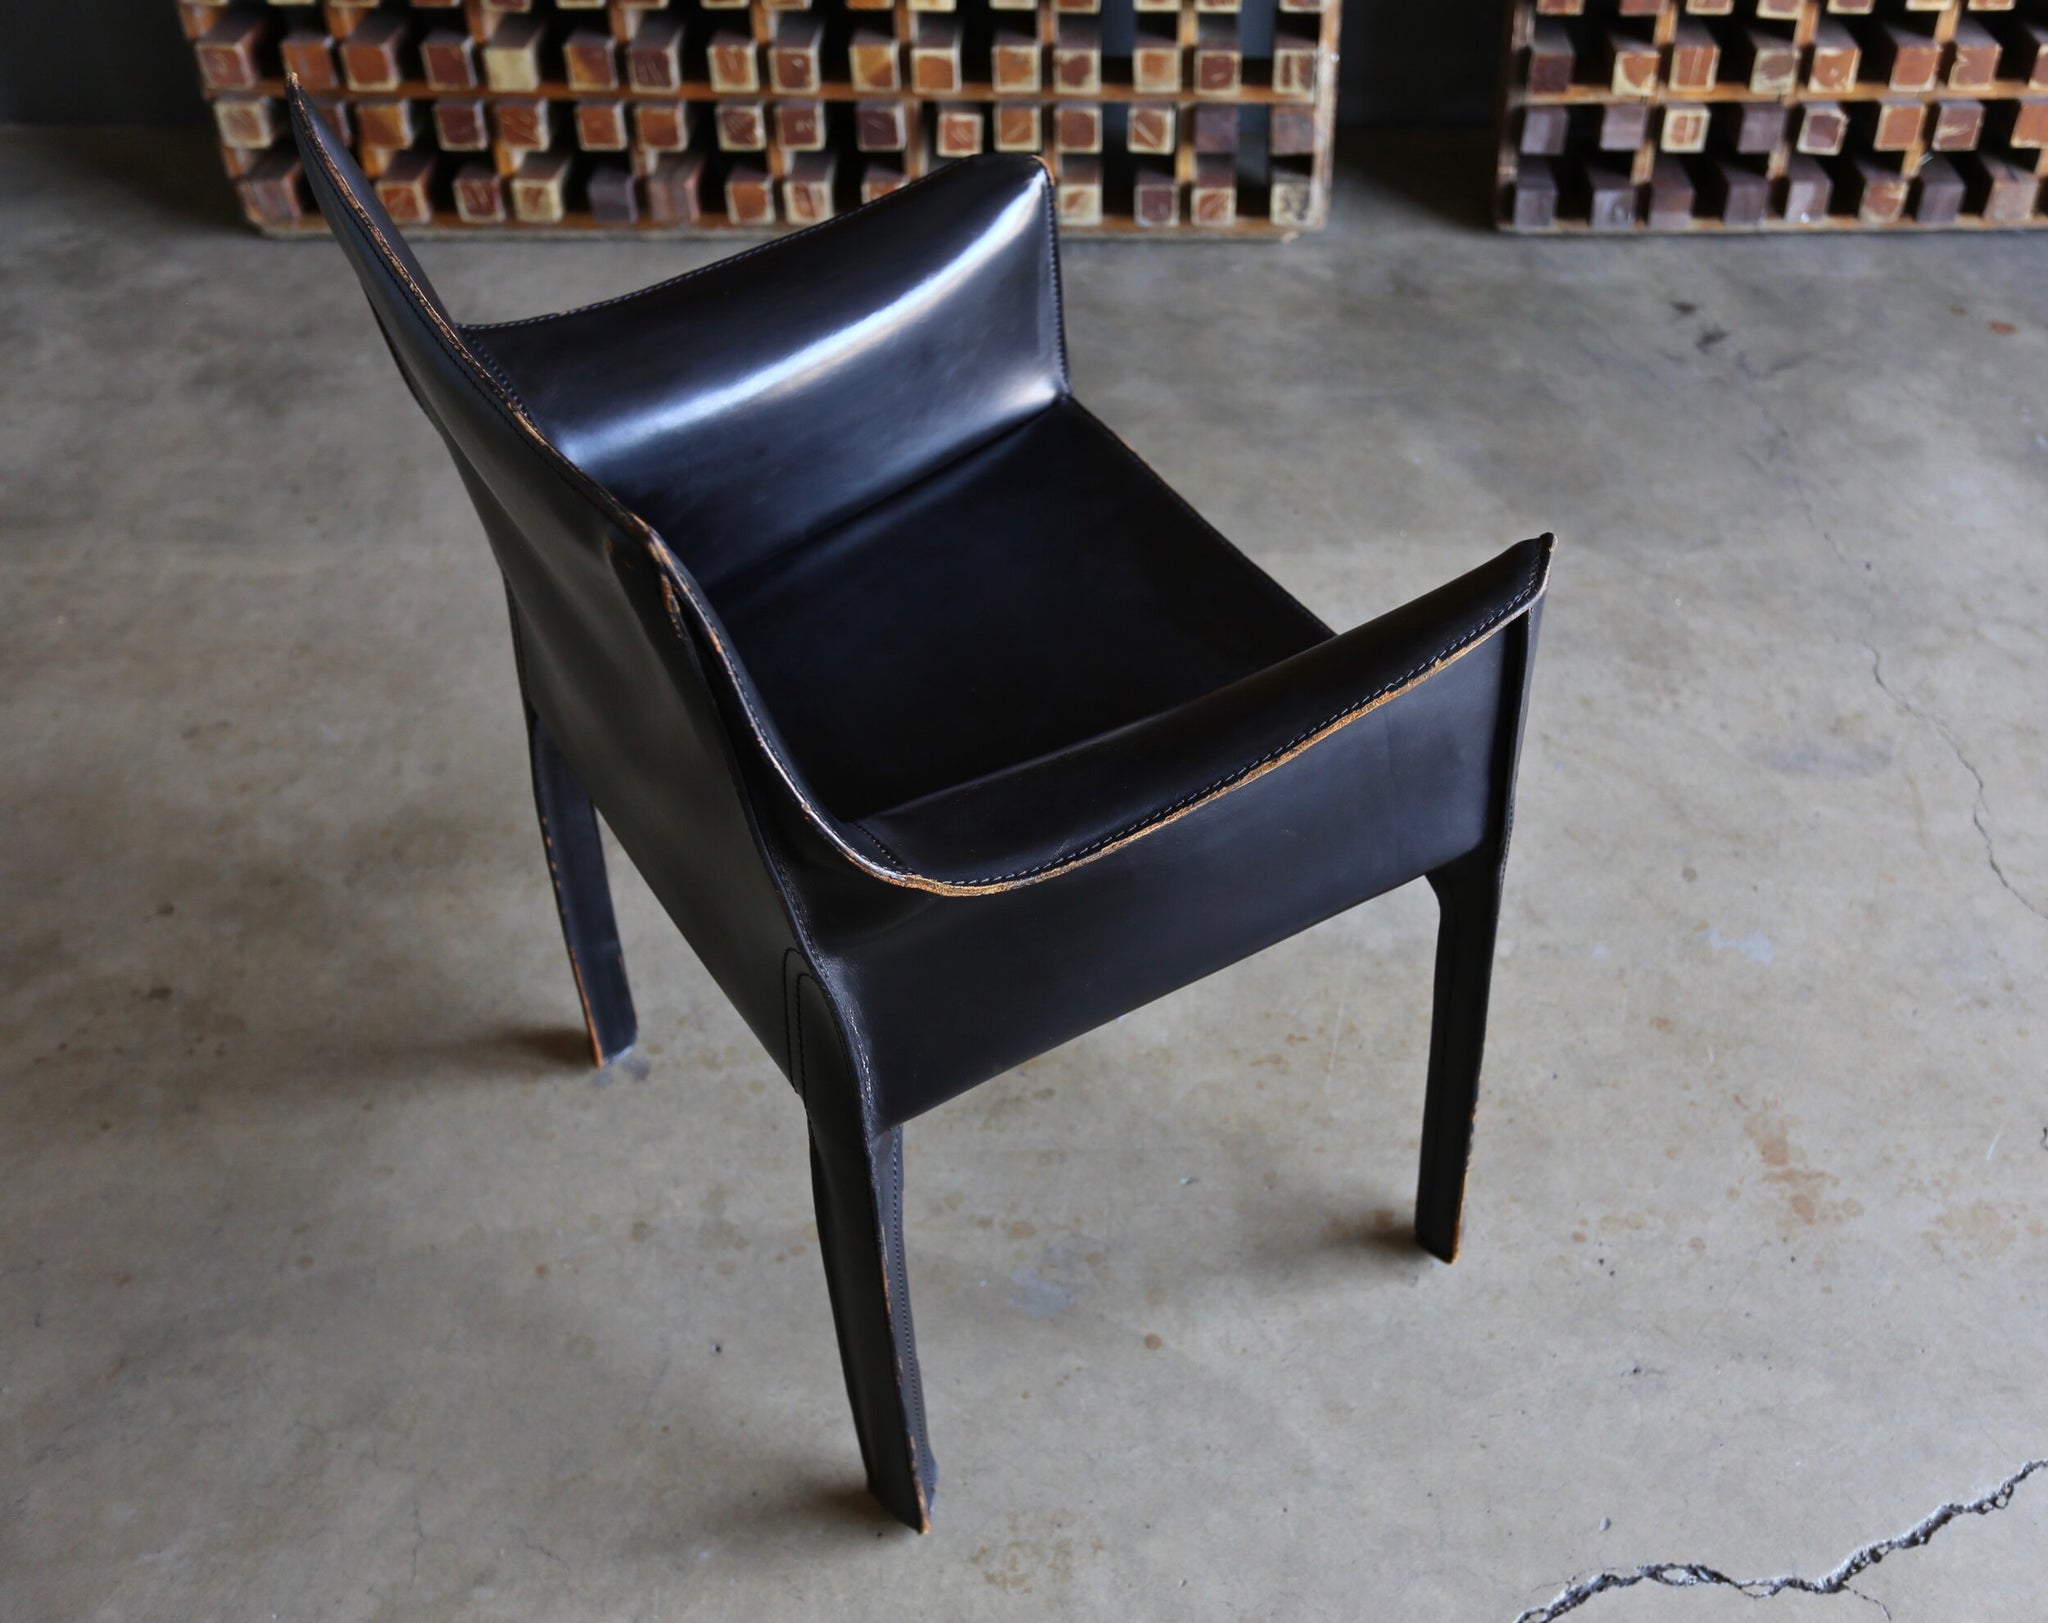 = SOLD = Mario Bellini Set of Six Black Leather "Cab" Chairs for Cassina